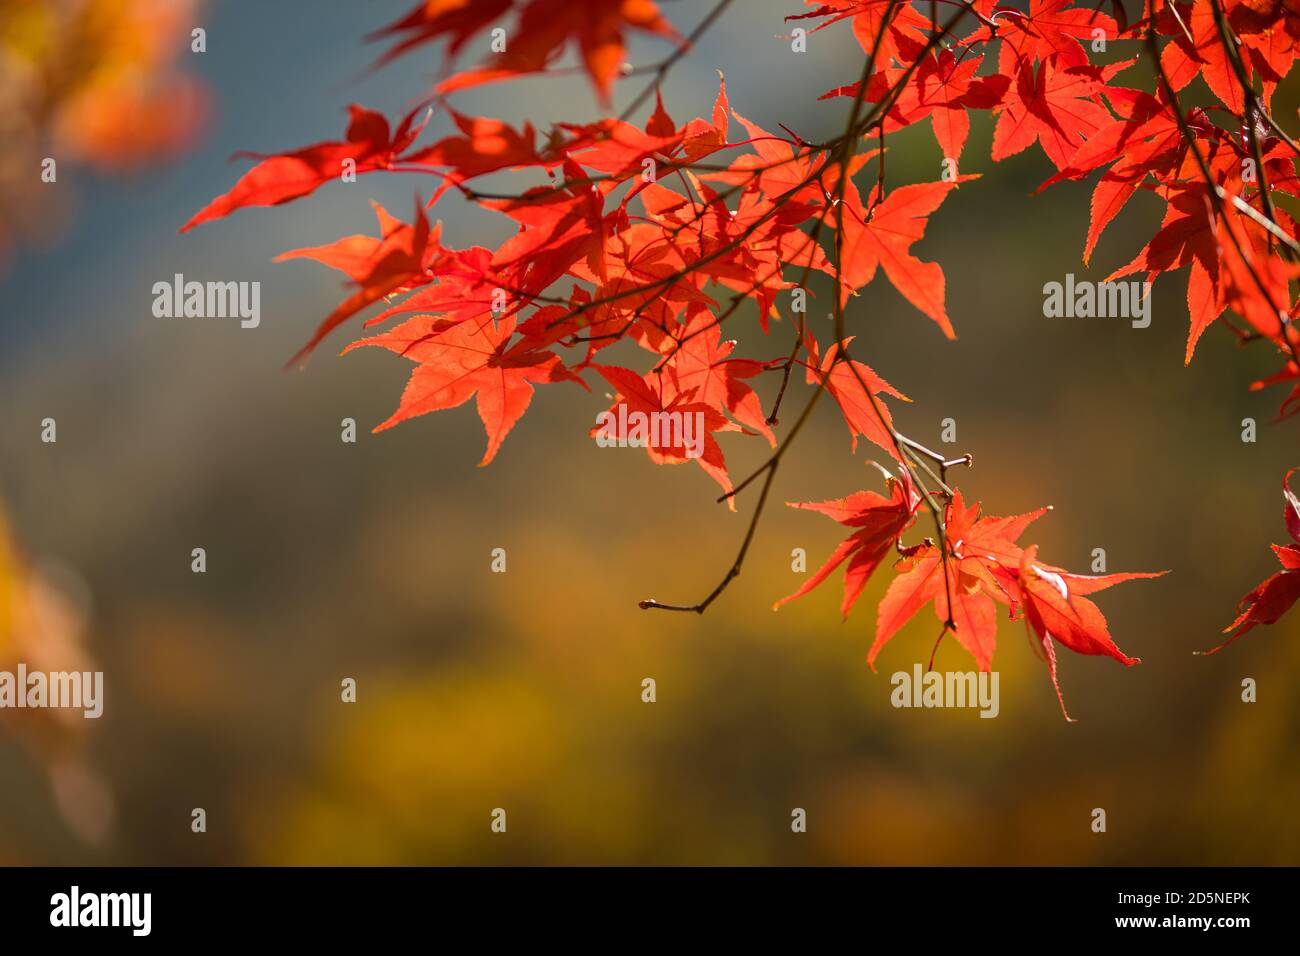 Red maple leaf close-up photo on autumn forest background in Korea Stock Photo